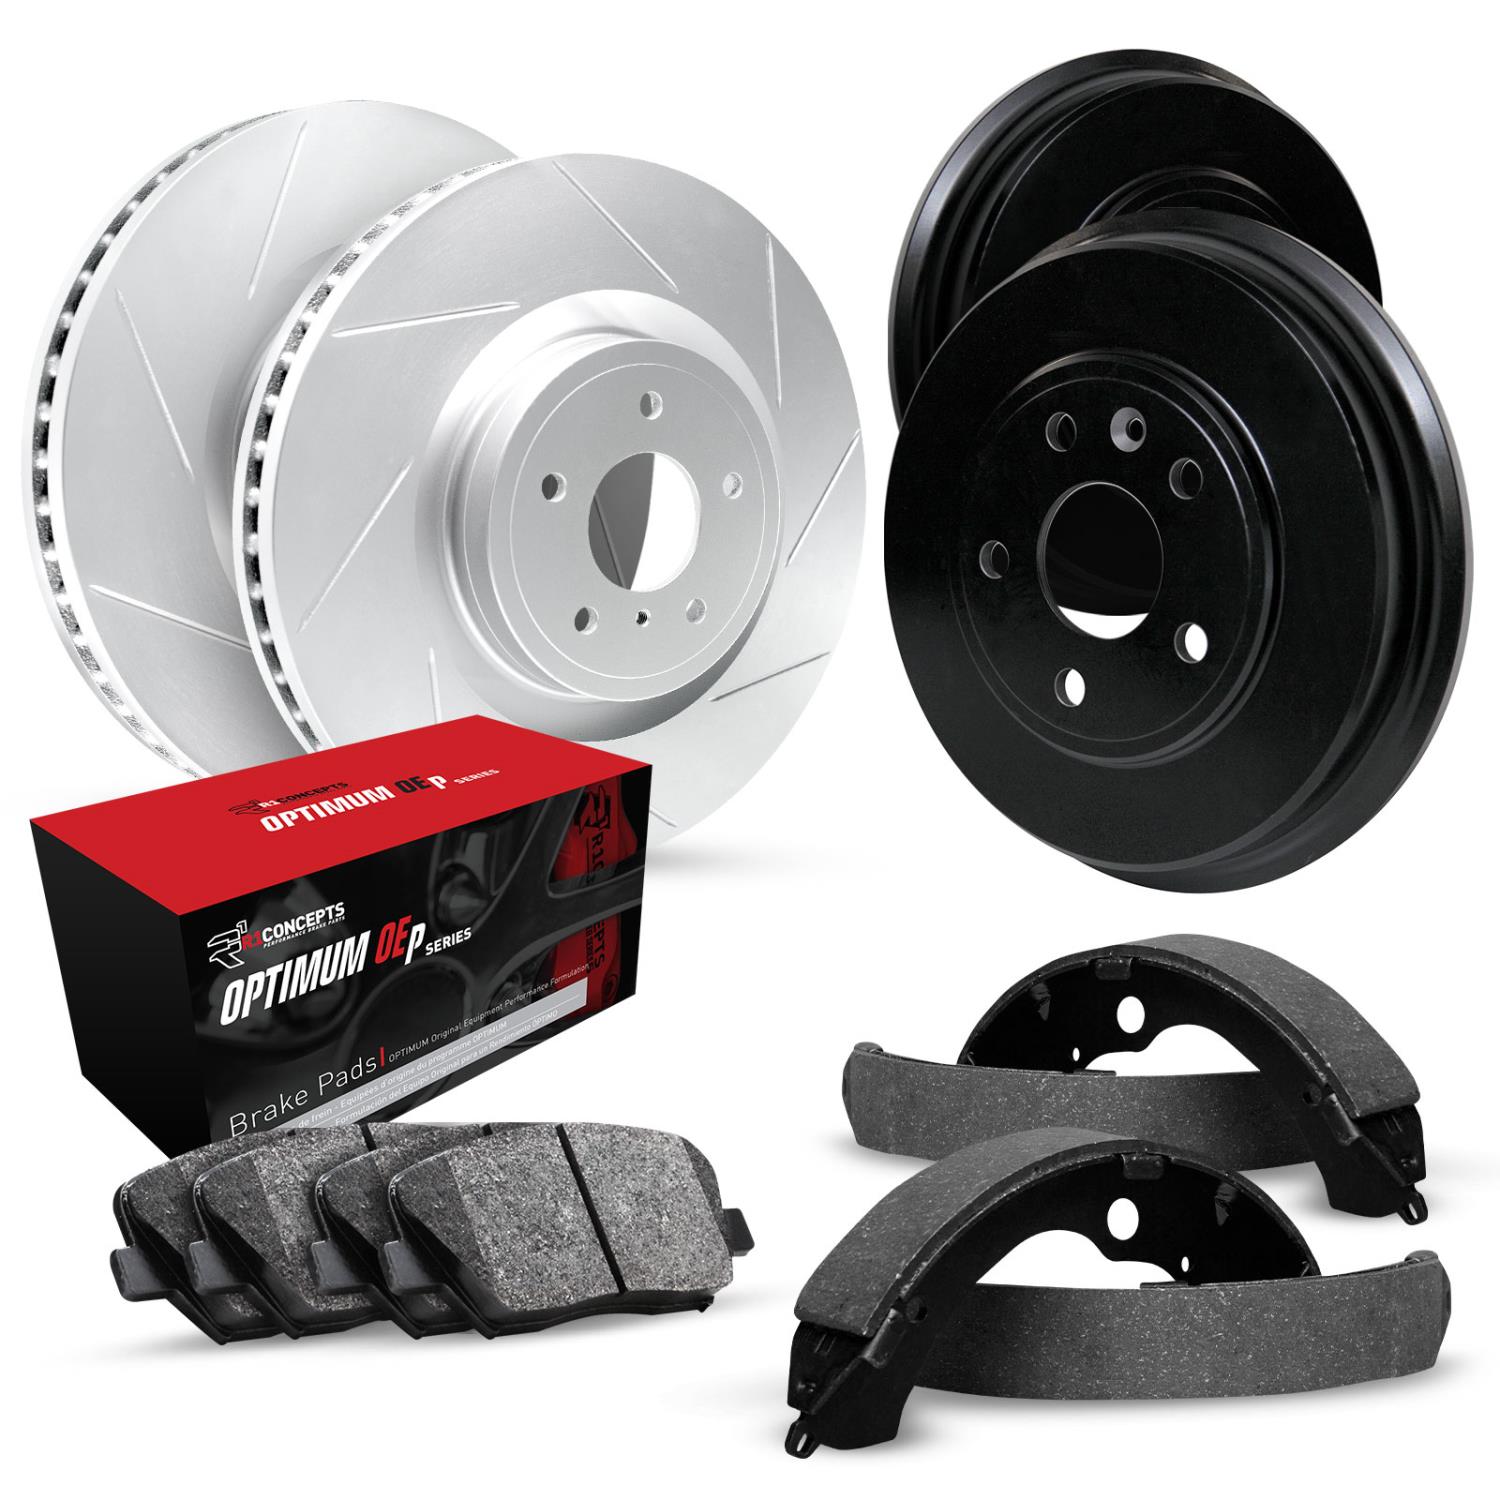 GEO-Carbon Slotted Brake Rotor & Drum Set w/Optimum OE Pads & Shoes, 1990-1992 Ford/Lincoln/Mercury/Mazda